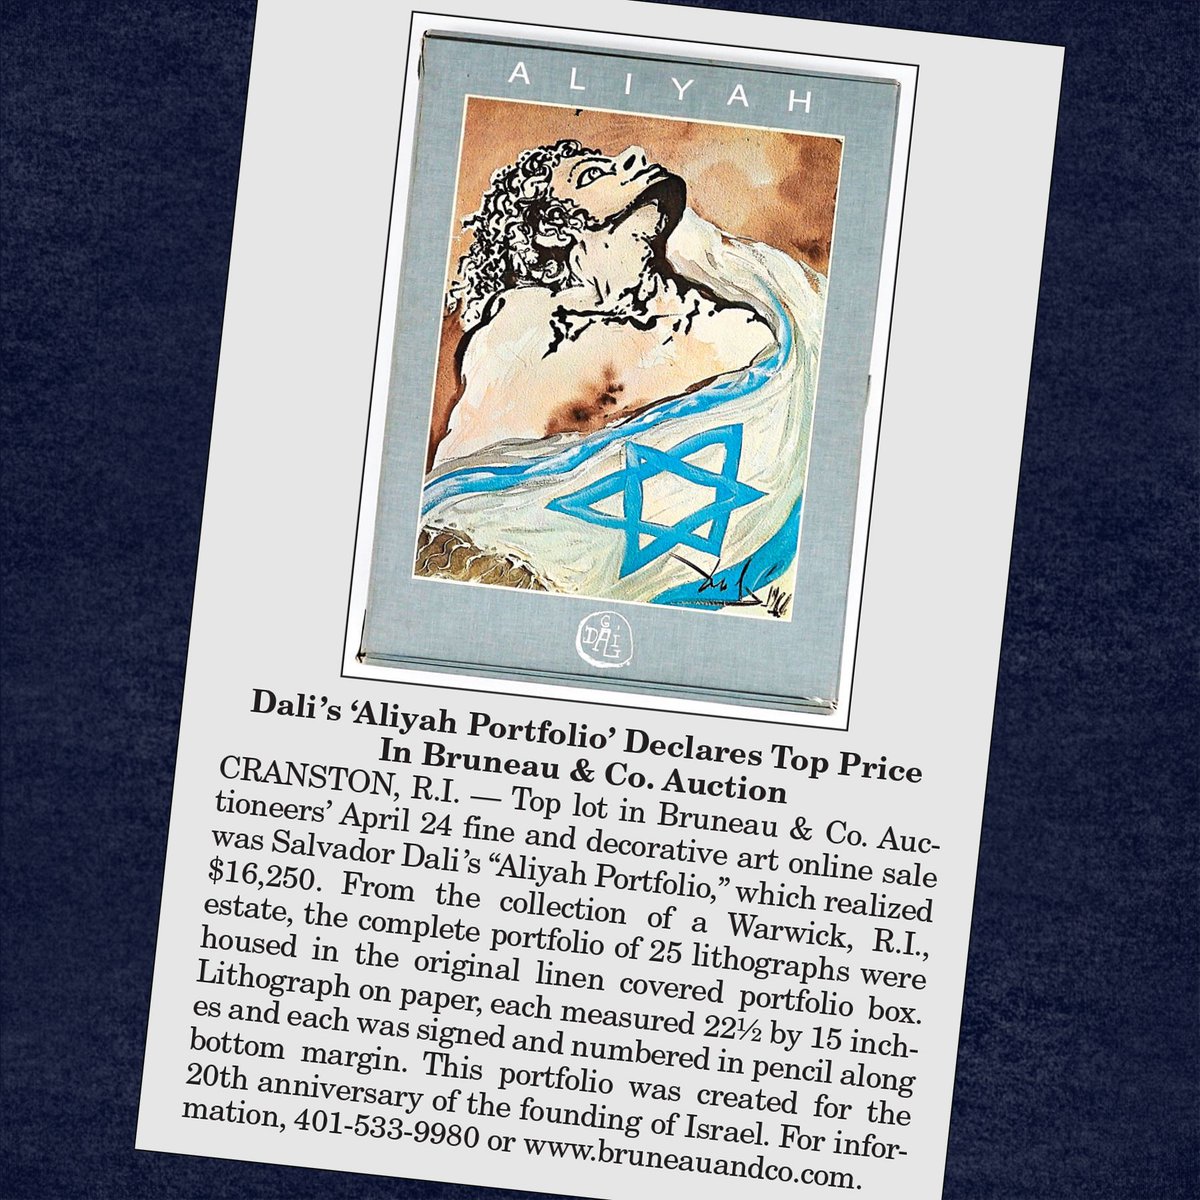 Don't miss our April 24th #FineArt #Auction highlight in this issue of #AntiquesandtheArts Weekly at buff.ly/3F2Rzfd! @thebeeantiques #salvadordali